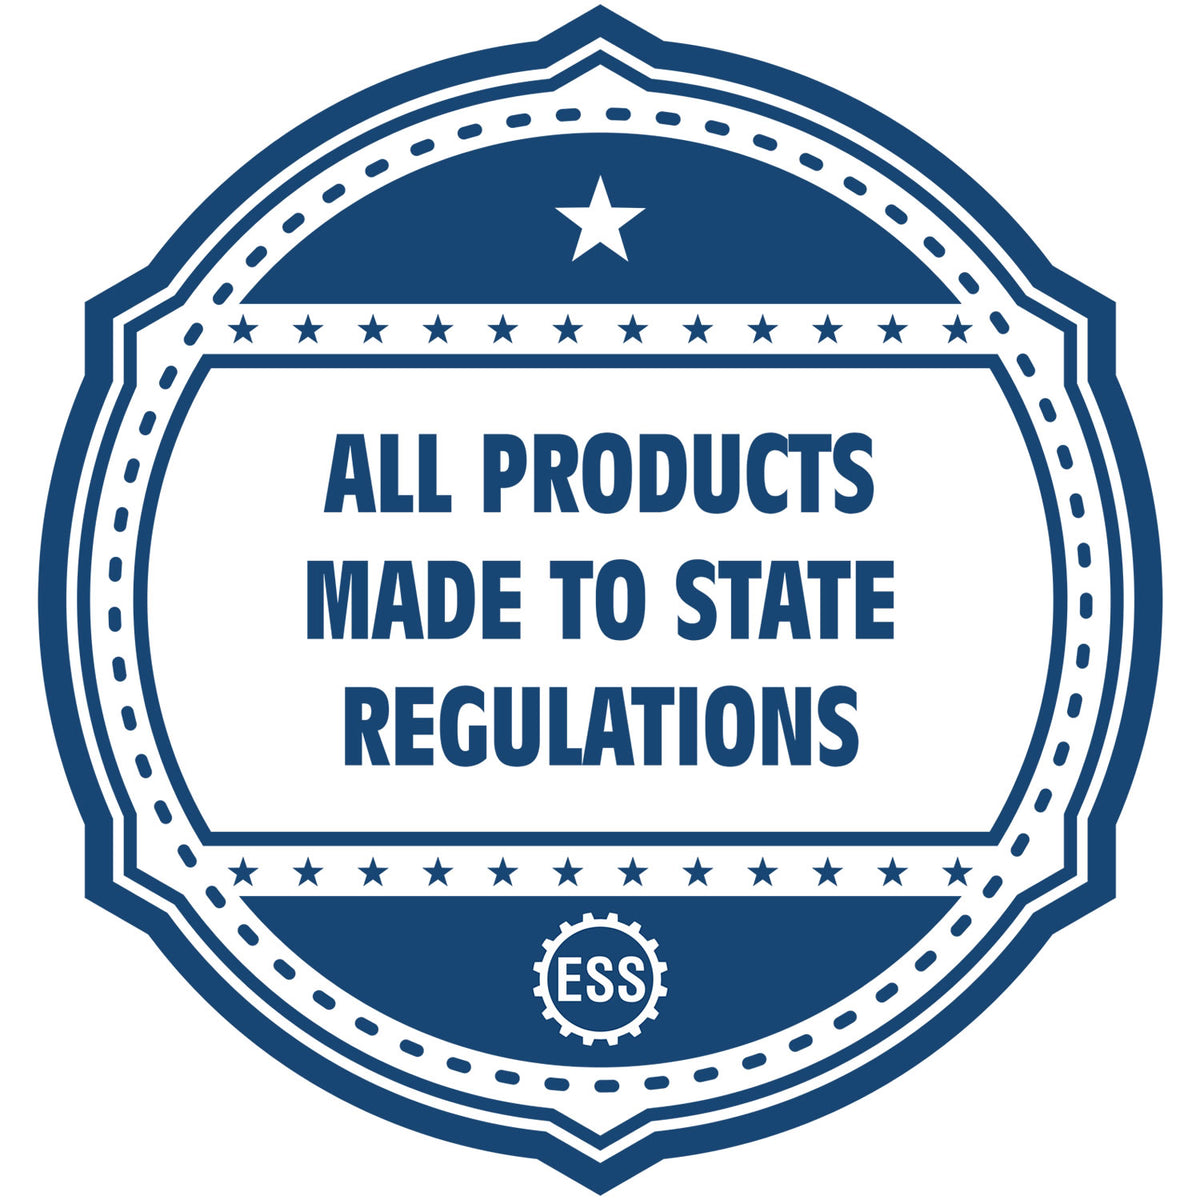 An icon or badge element for the Premium MaxLight Pre-Inked Iowa Landscape Architectural Stamp showing that this product is made in compliance with state regulations.